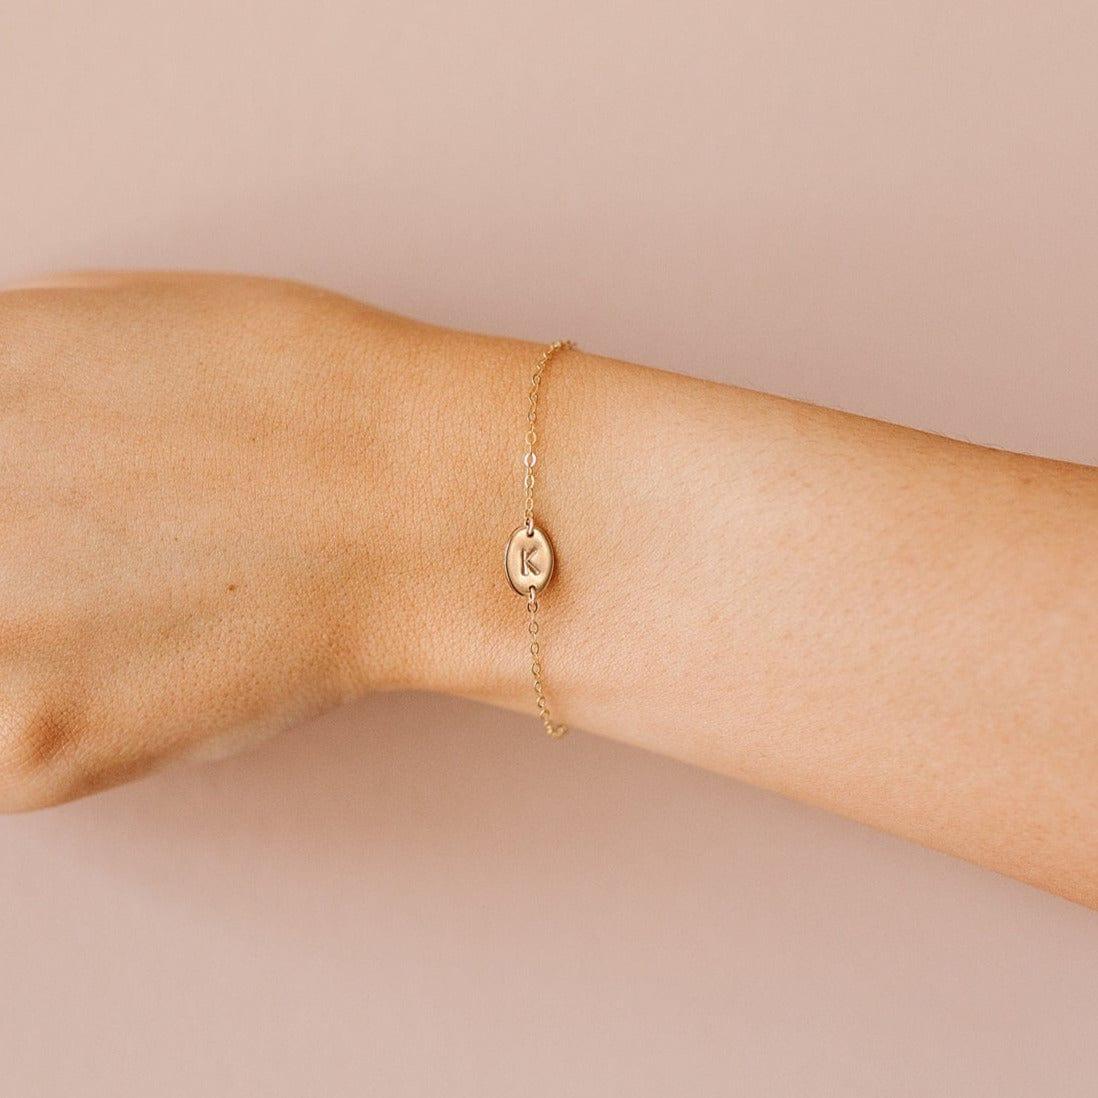 Lydia Oval Initial Bracelet - Nolia Jewelry - Meaningful + Sustainably Handcrafted Jewelry